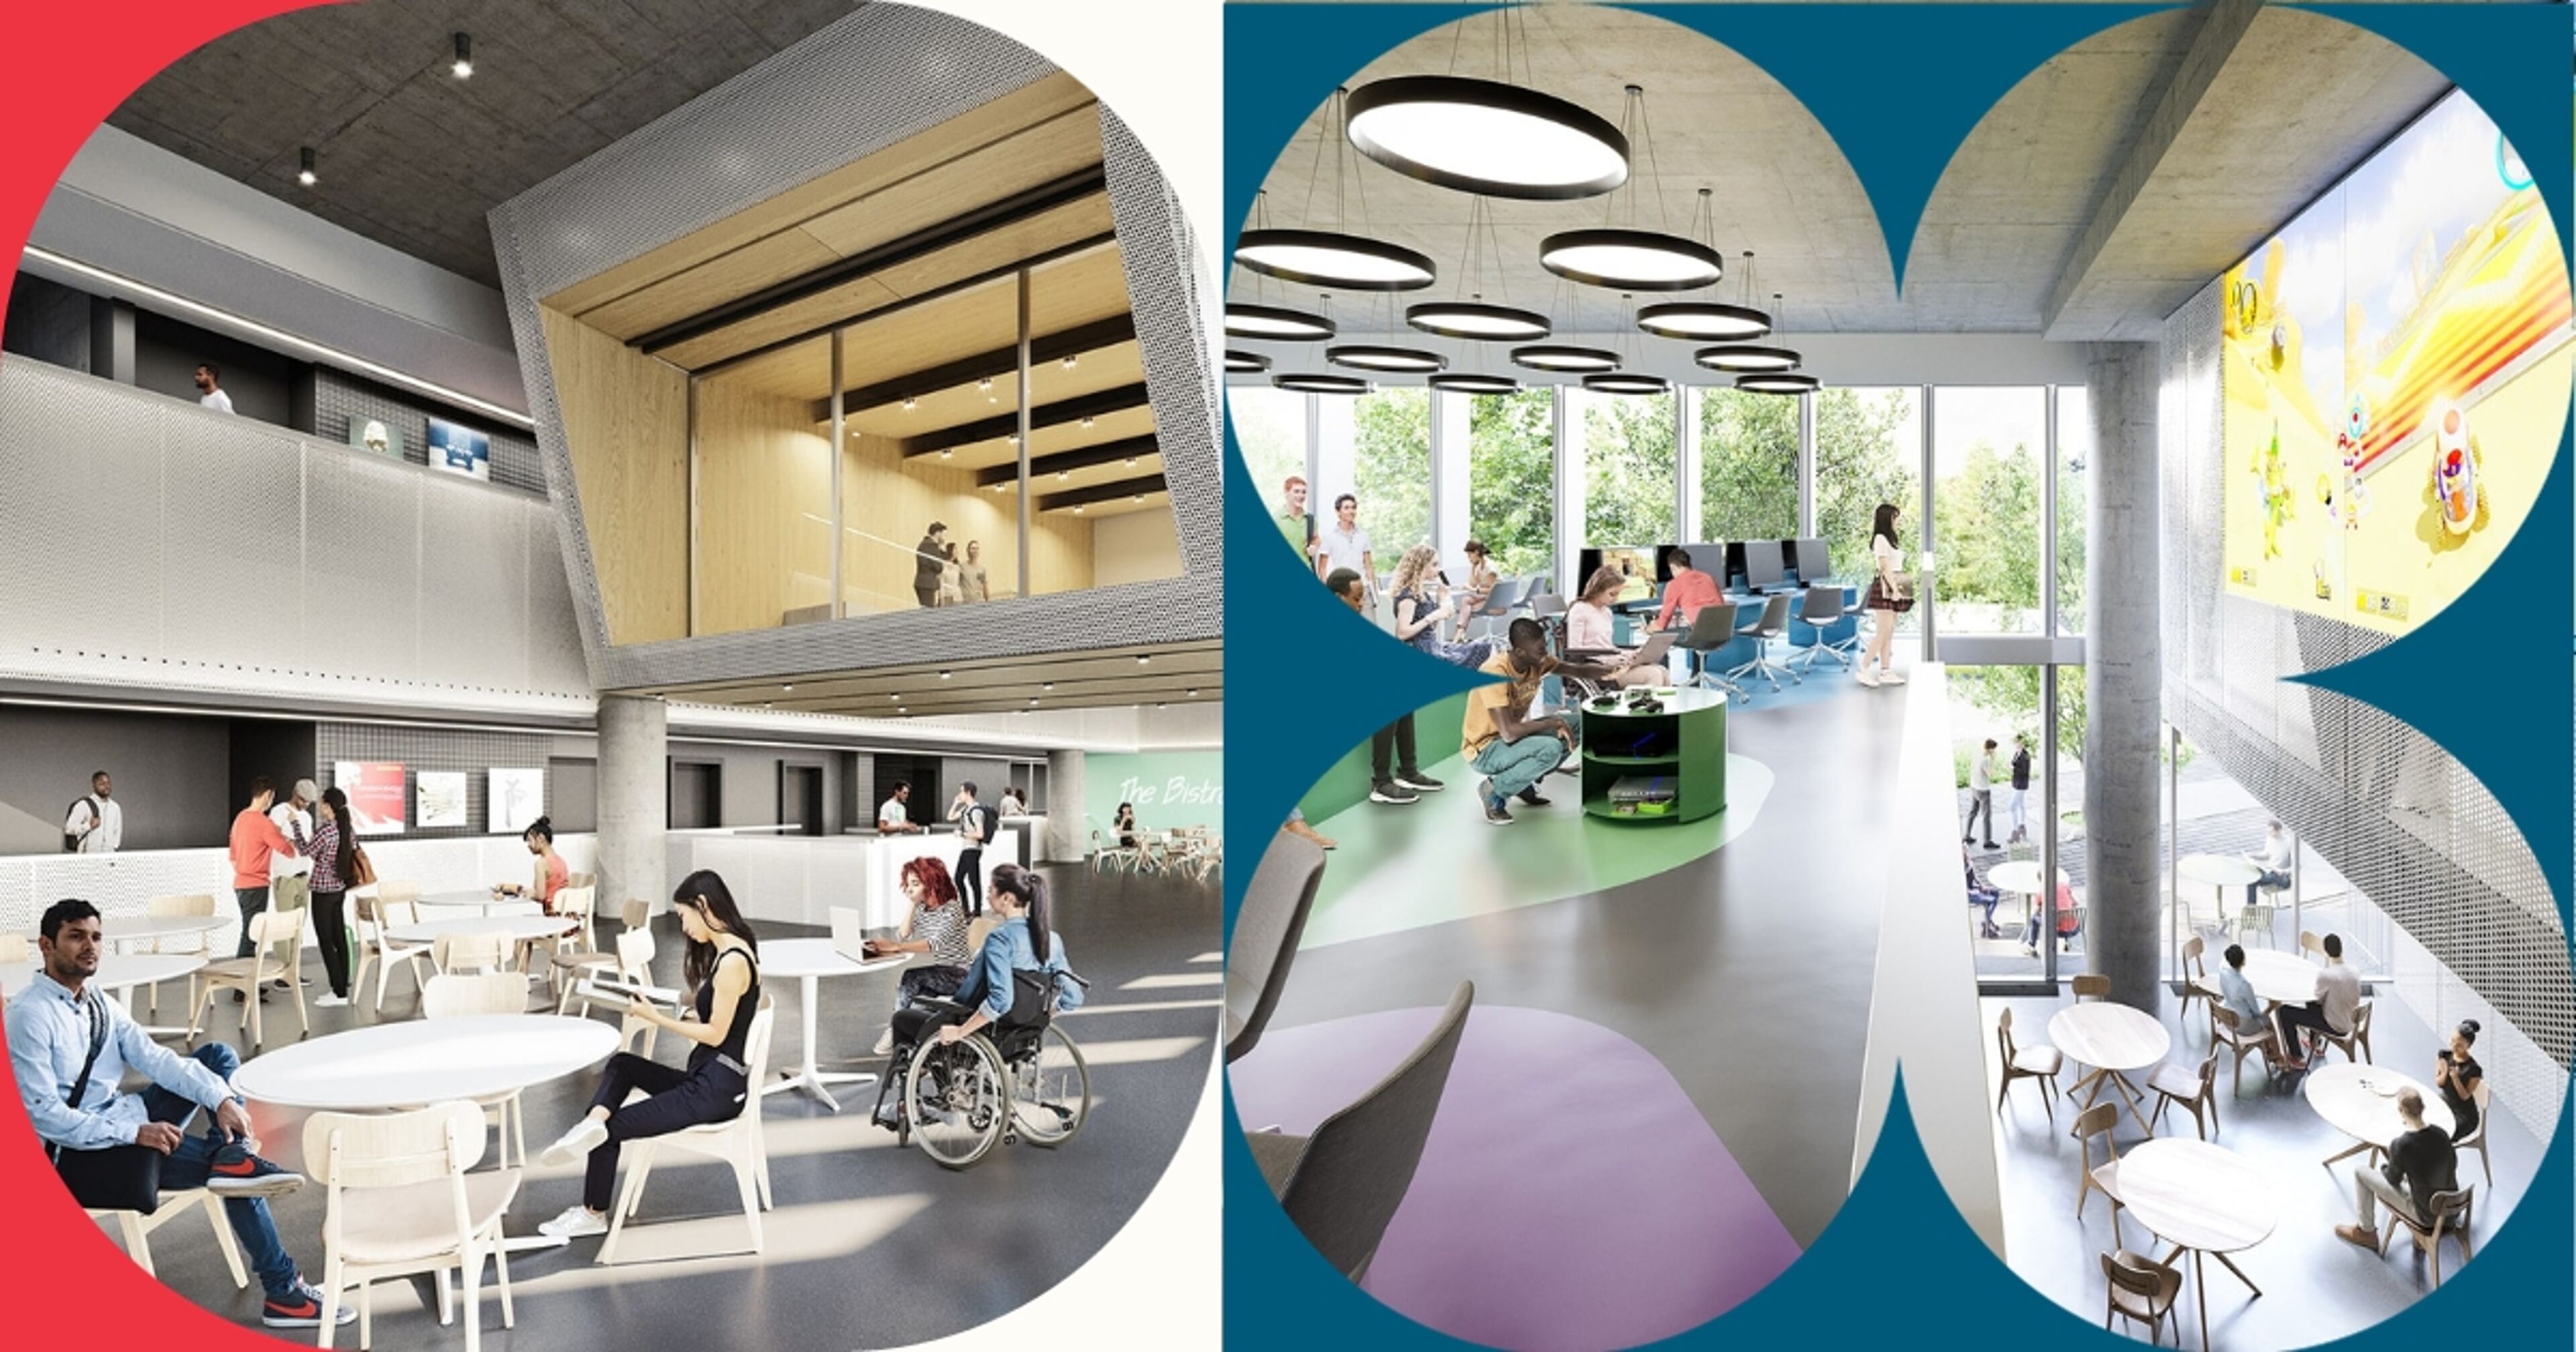 A collage of vibrant college interiors showcasing contemporary architecture and inclusive student environments.